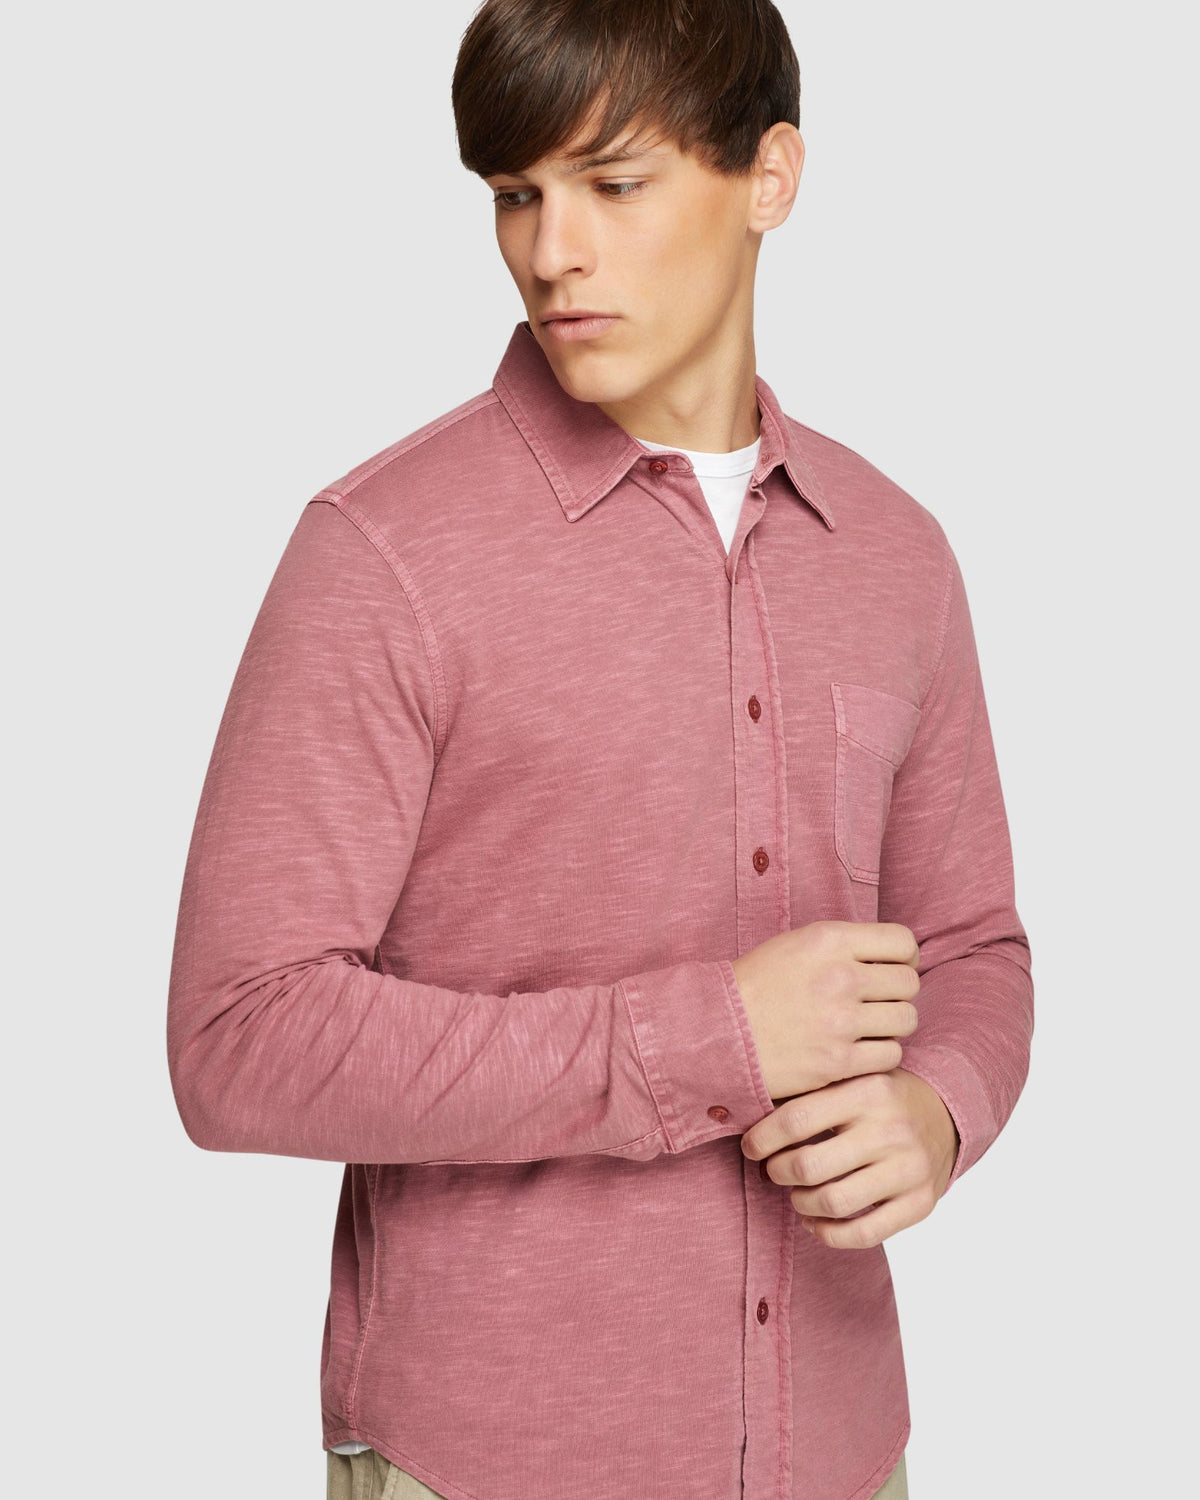 OLIVER KNITTED SHIRT